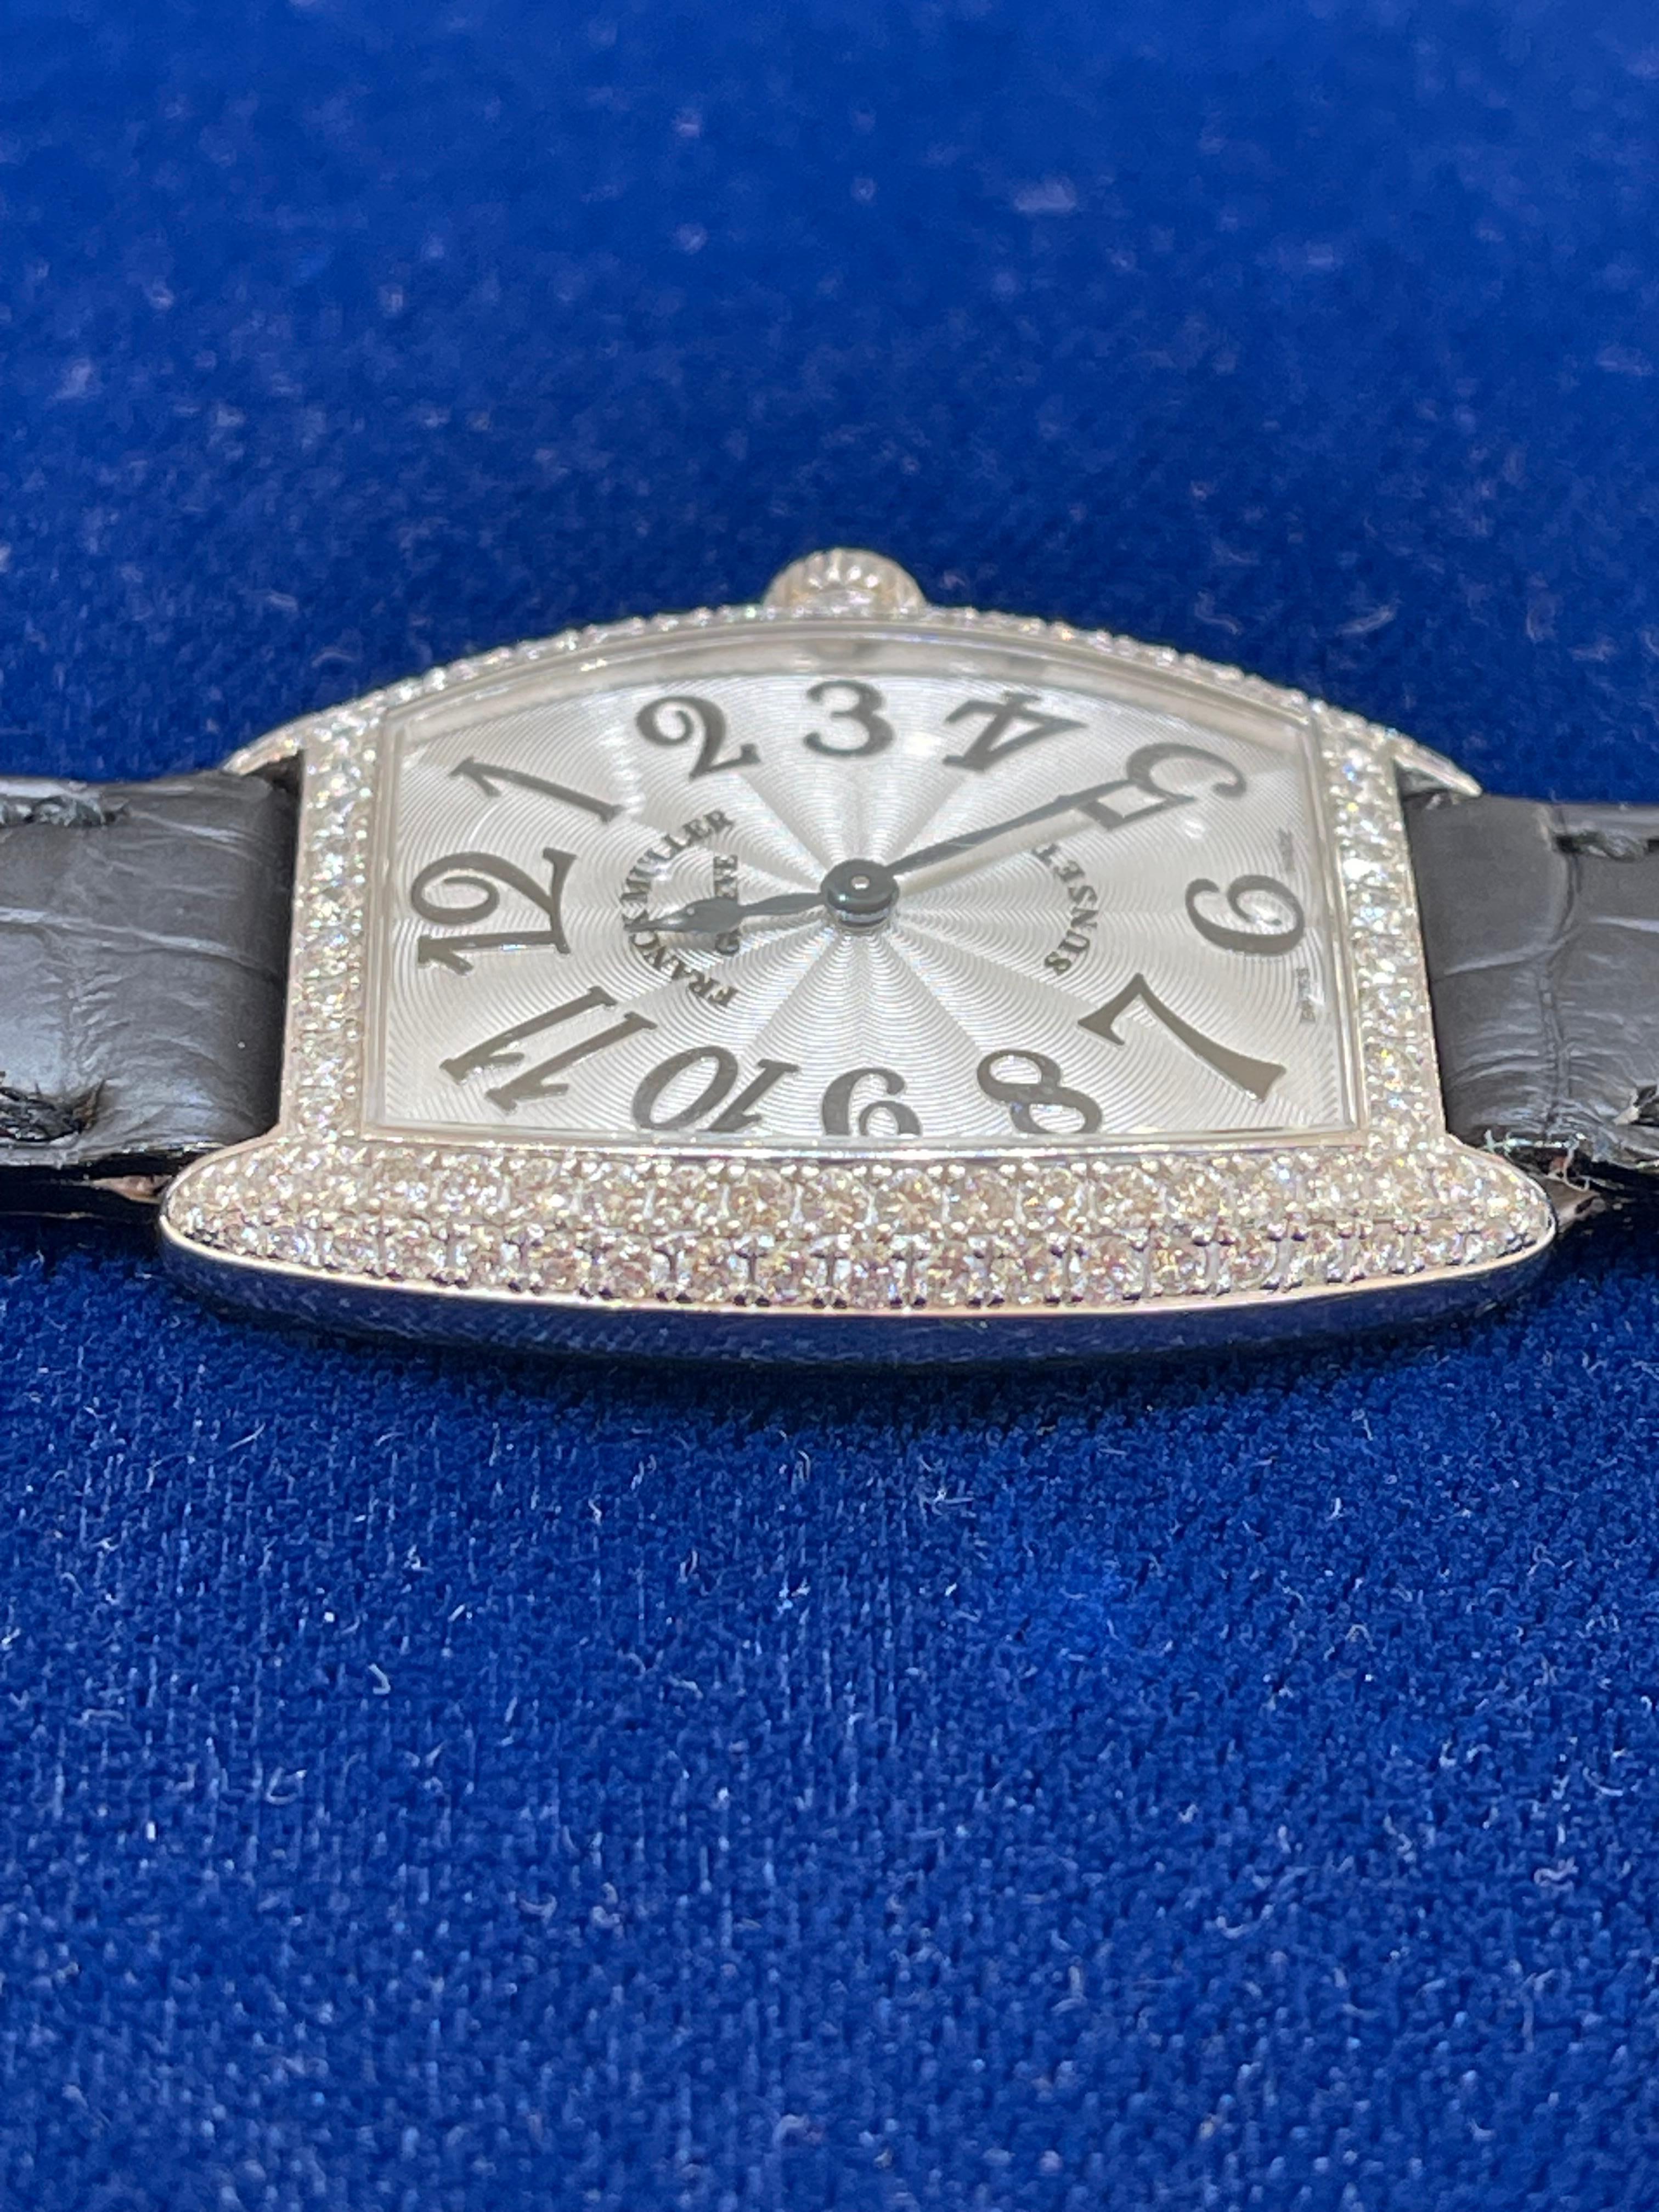 Franck Muller diamond bezel sunset watch with a sapphire crown. The original leather strap is included, the buckle and the case are both 18k gold. The length measures 8 inches,  case measures 27.6x28.3 and total weight is 39.7 grams. 